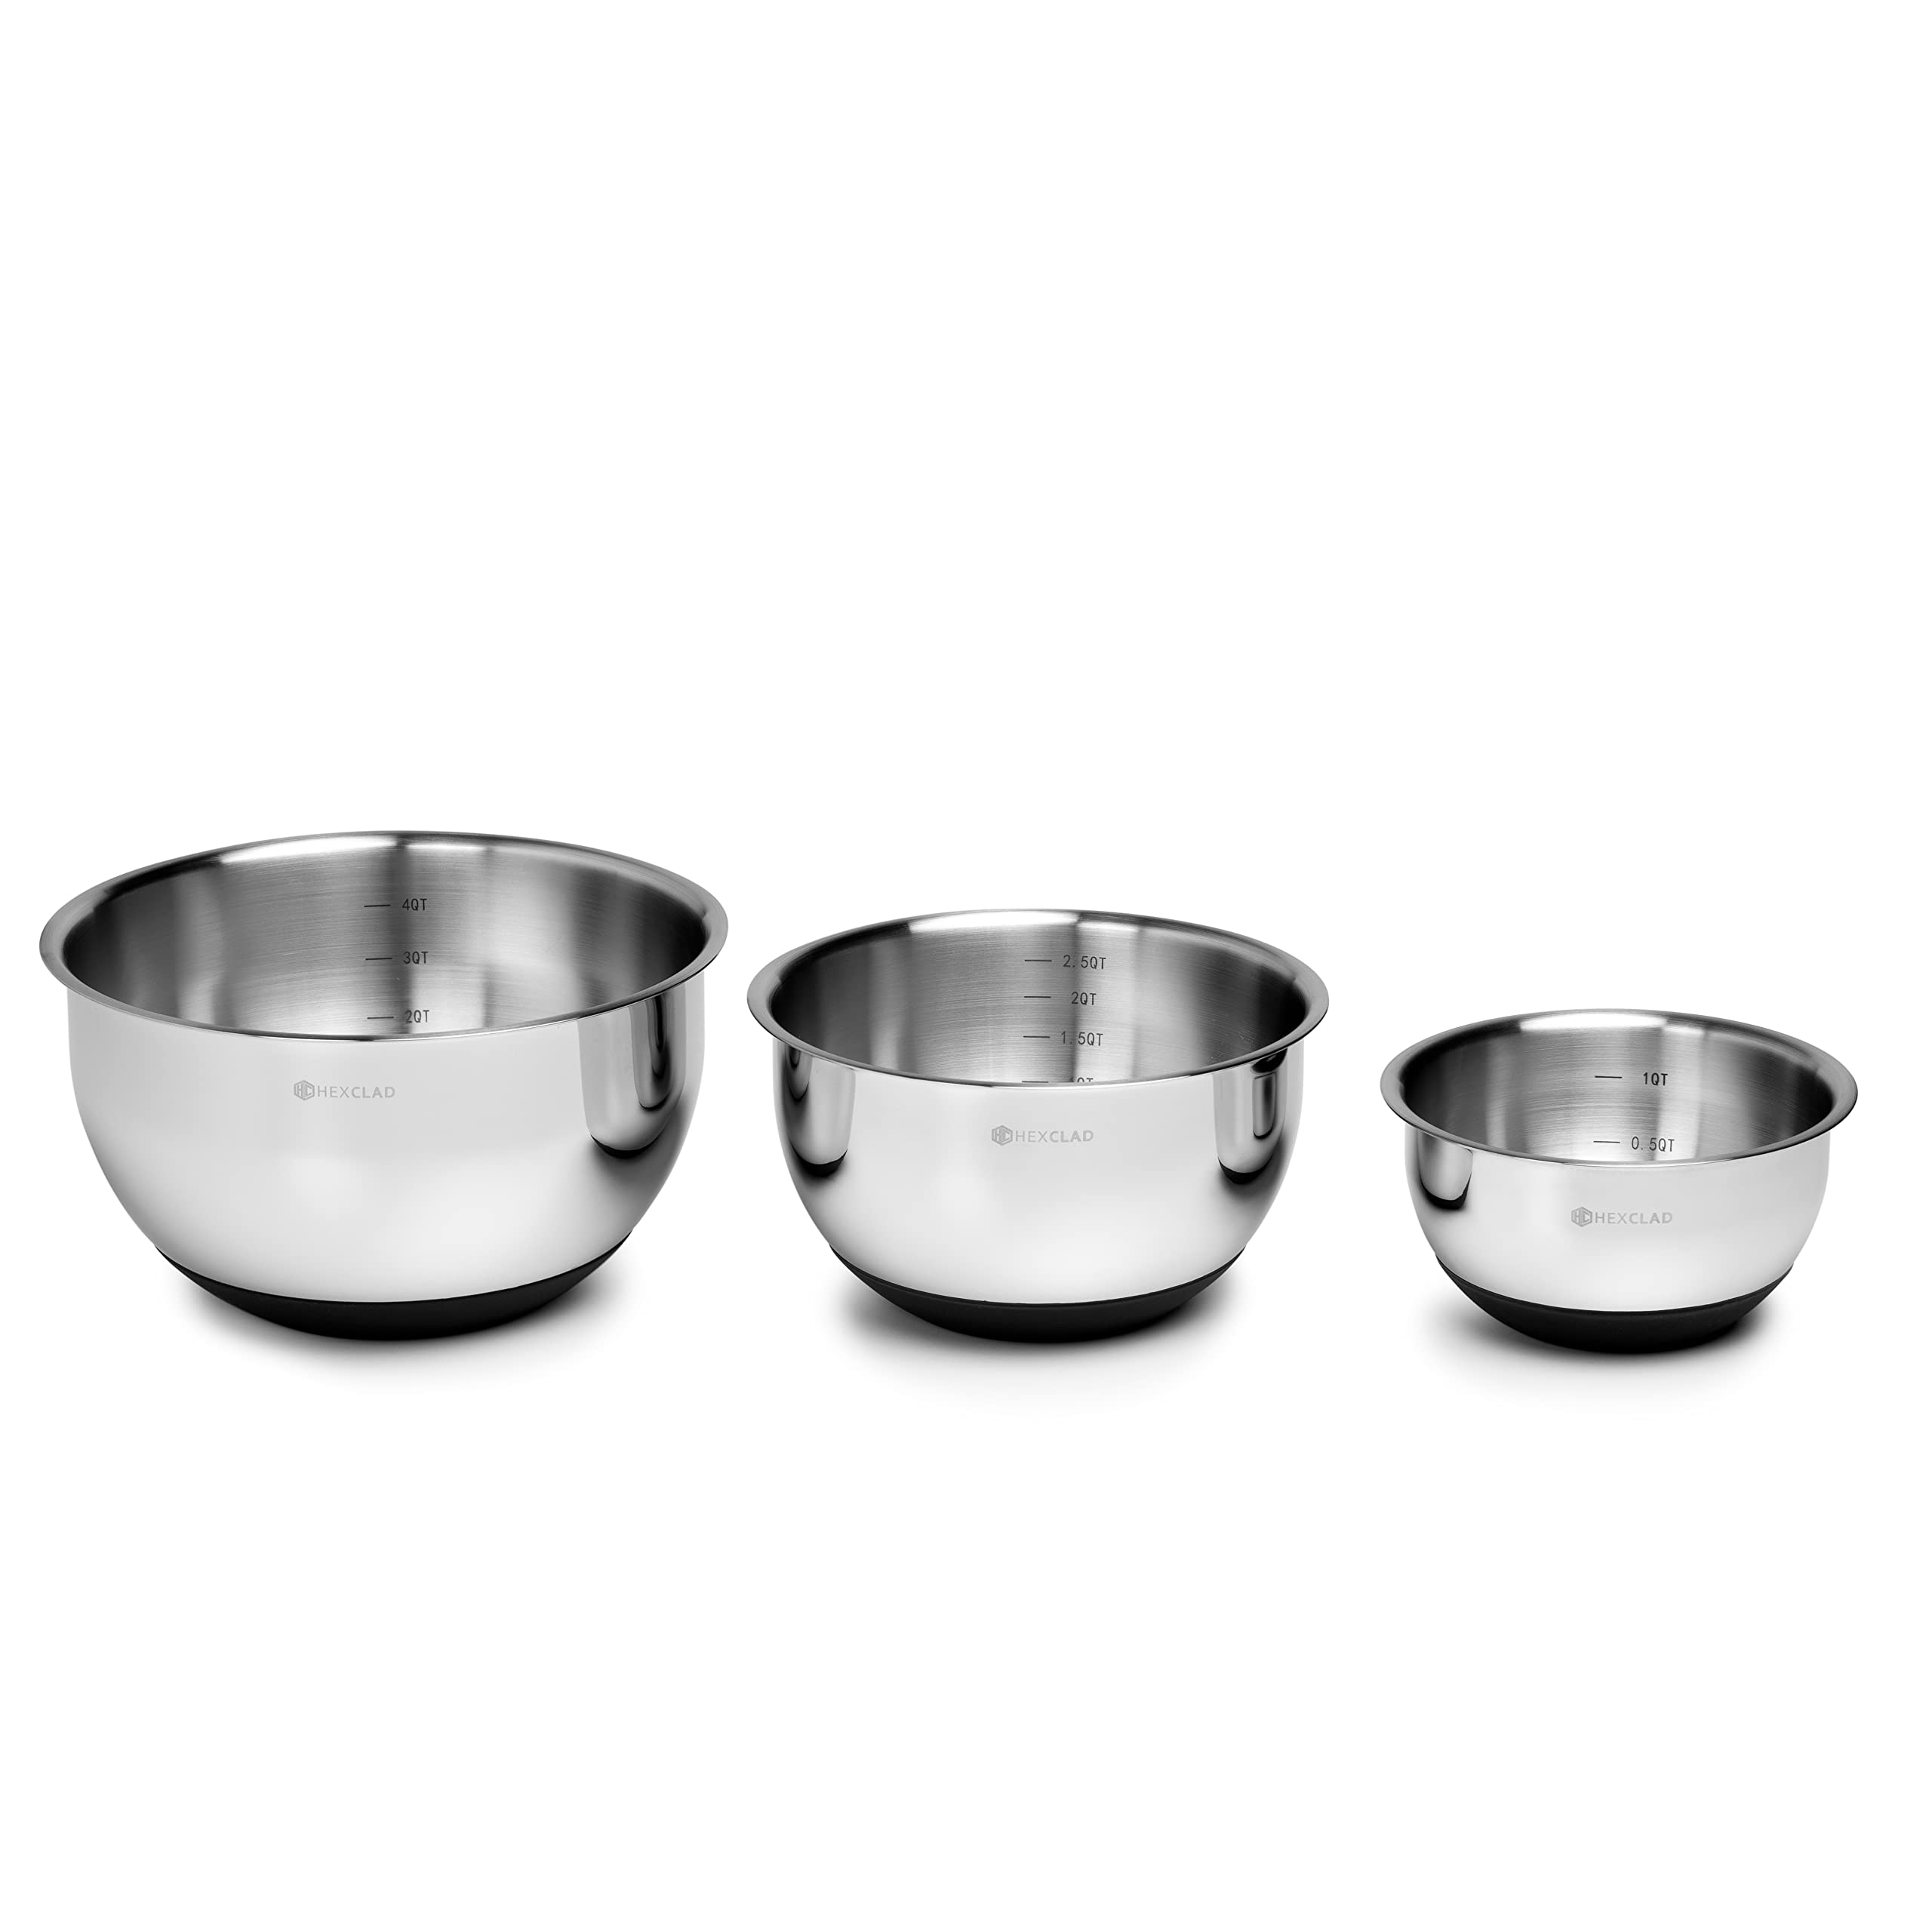 HexClad Cookware Set of Three Stainless Steel Mixing Bowls with Air Tight Vacuum Seal and Non-Slip Safety Base, 1.3,3 and 5 Quarts